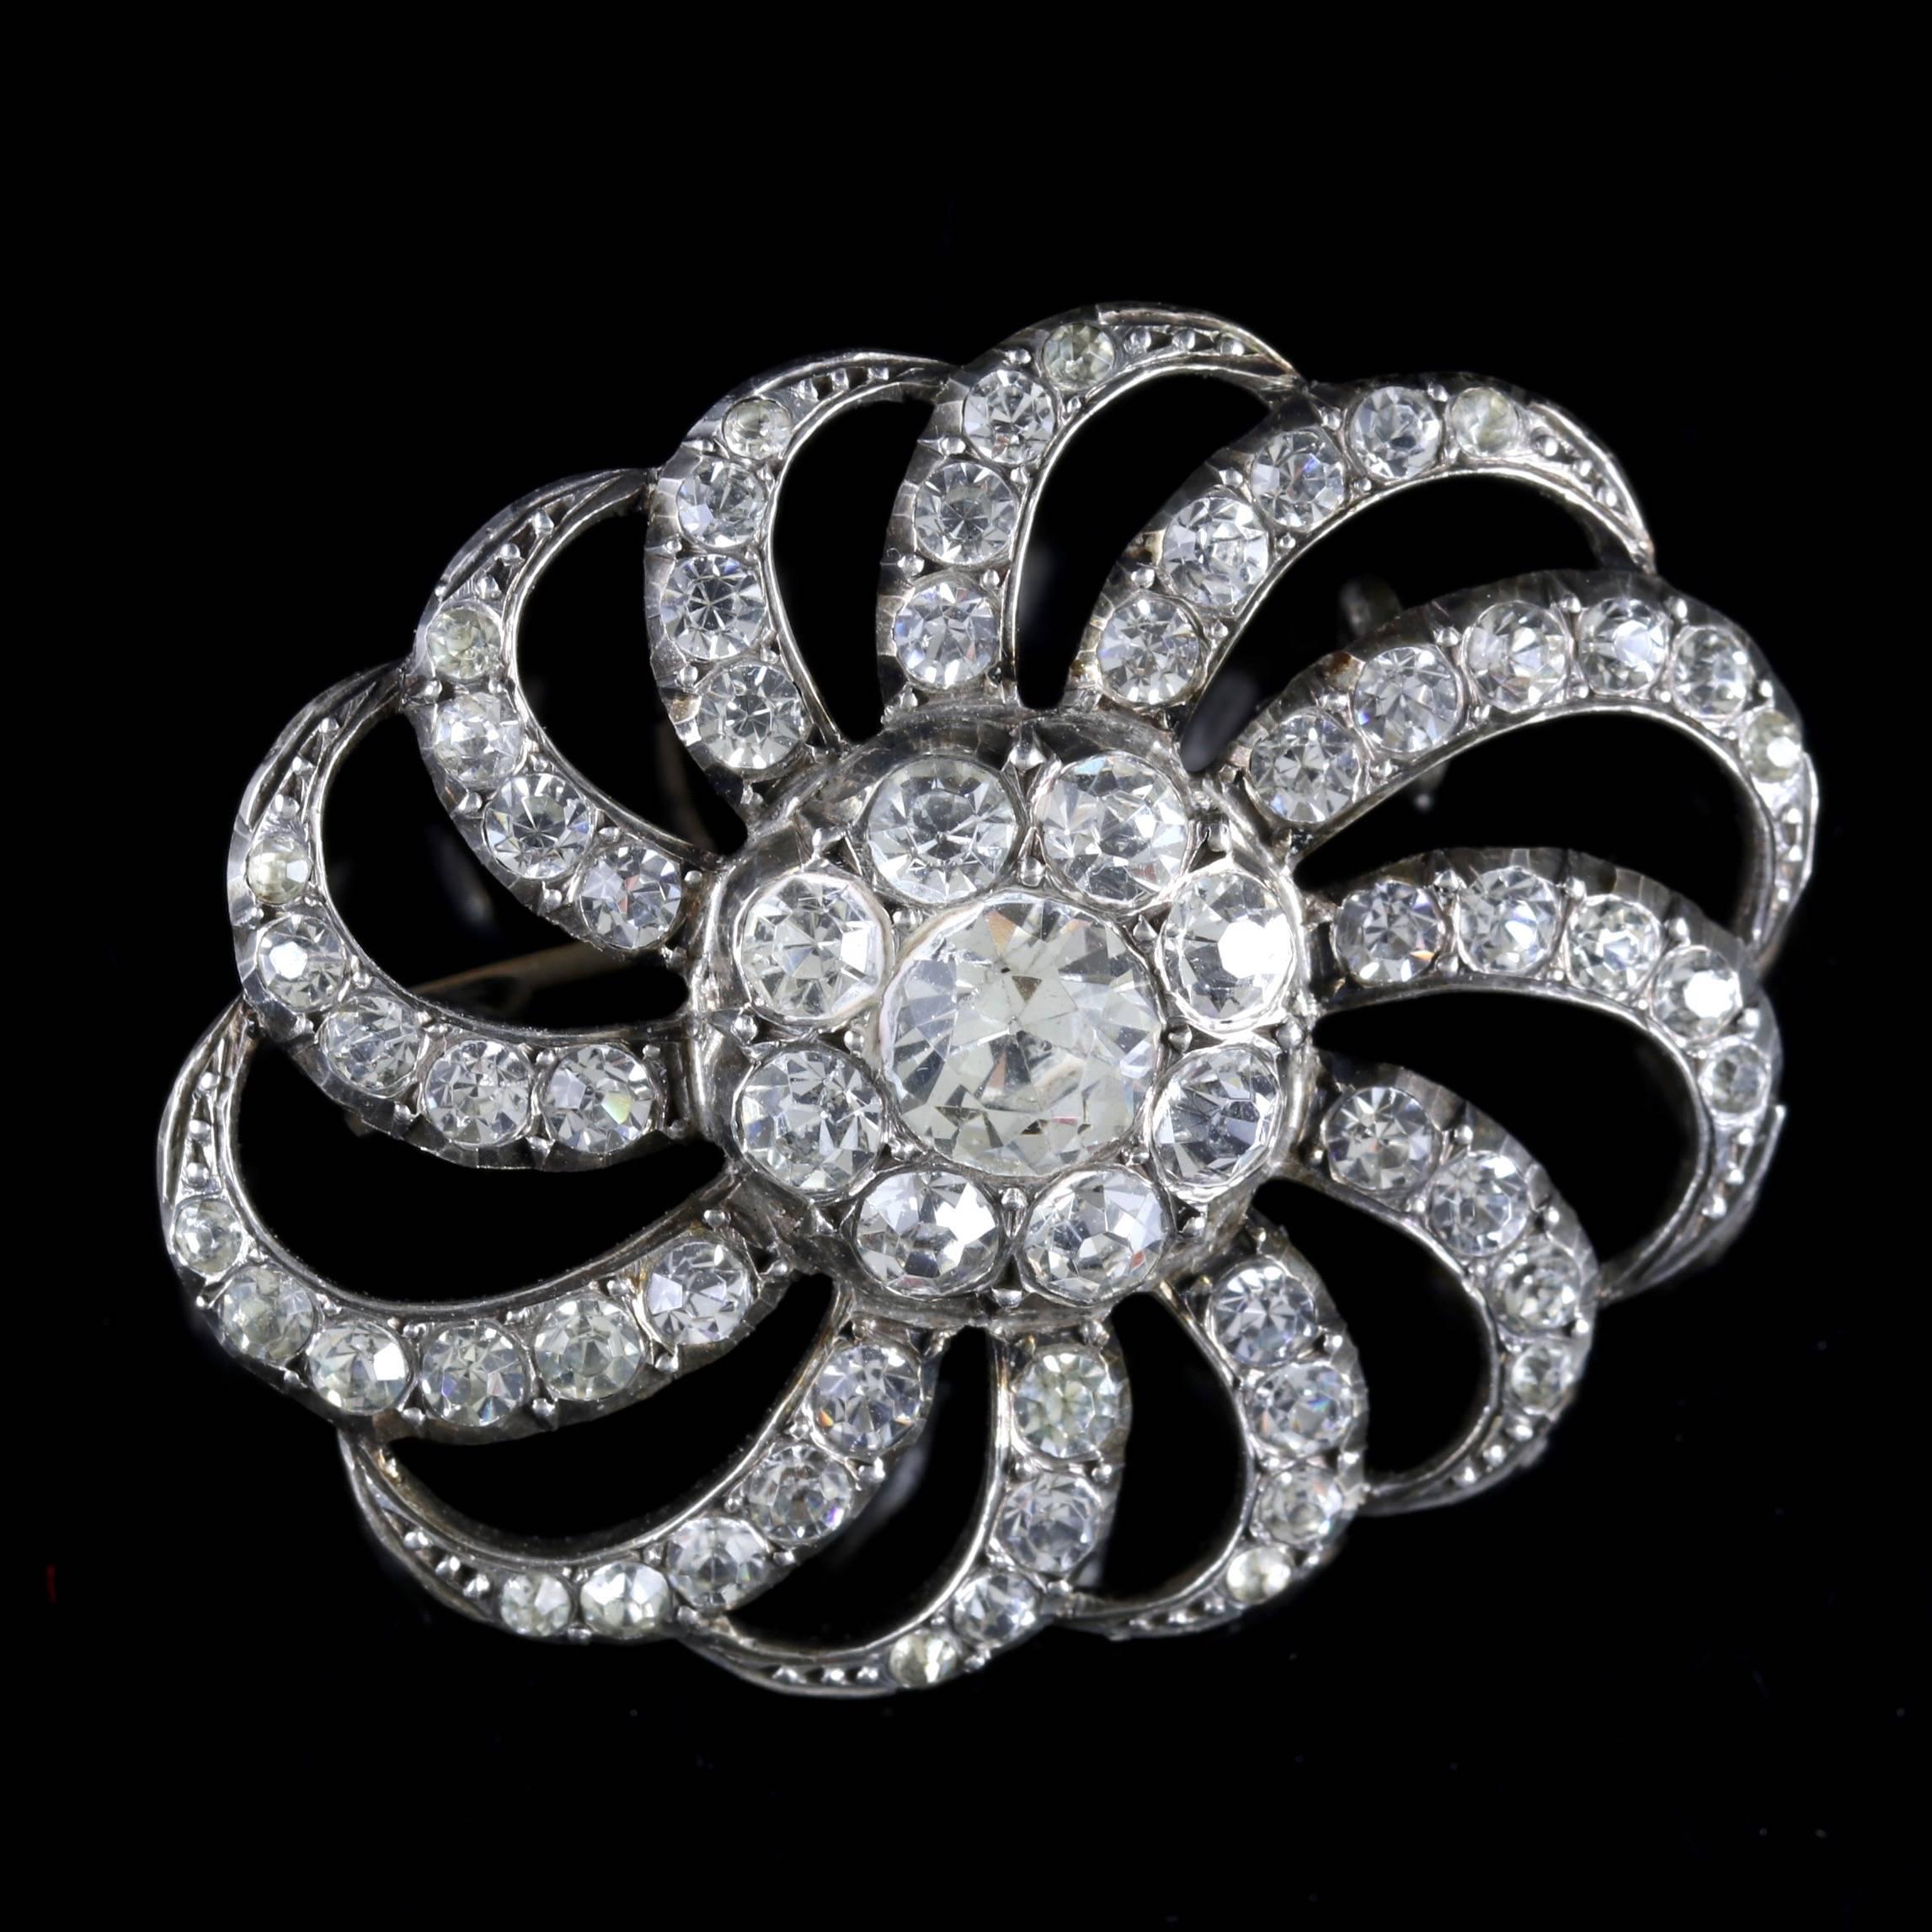 This fabulous Victorian Paste Stone brooch is set in Silver, Circa 1900.

The brooch is adorned in sparkling Paste Stones that sparkle just like Diamonds, they graduate in size all round the brooch. it is truly beautiful.

Paste is a heavy, very